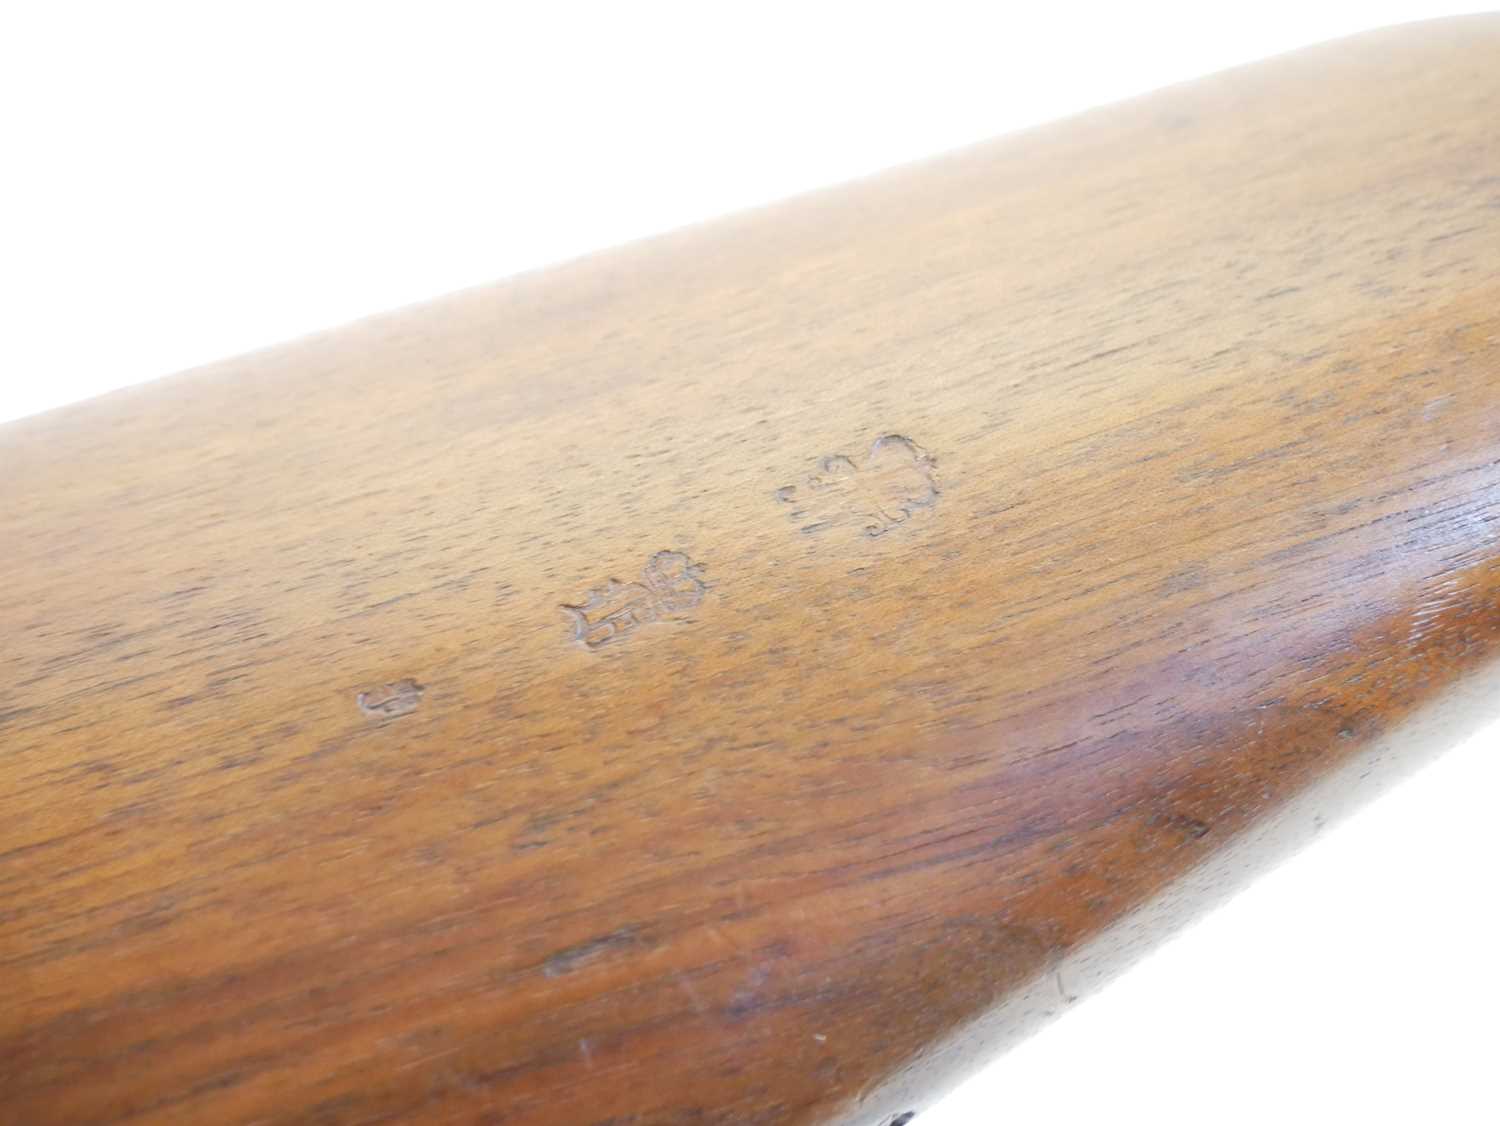 Mauser M1871/84 bolt action rifle 11 x 60R / .43 calibre, matching serial numbers 6701, 30.5" barrel - Image 11 of 20